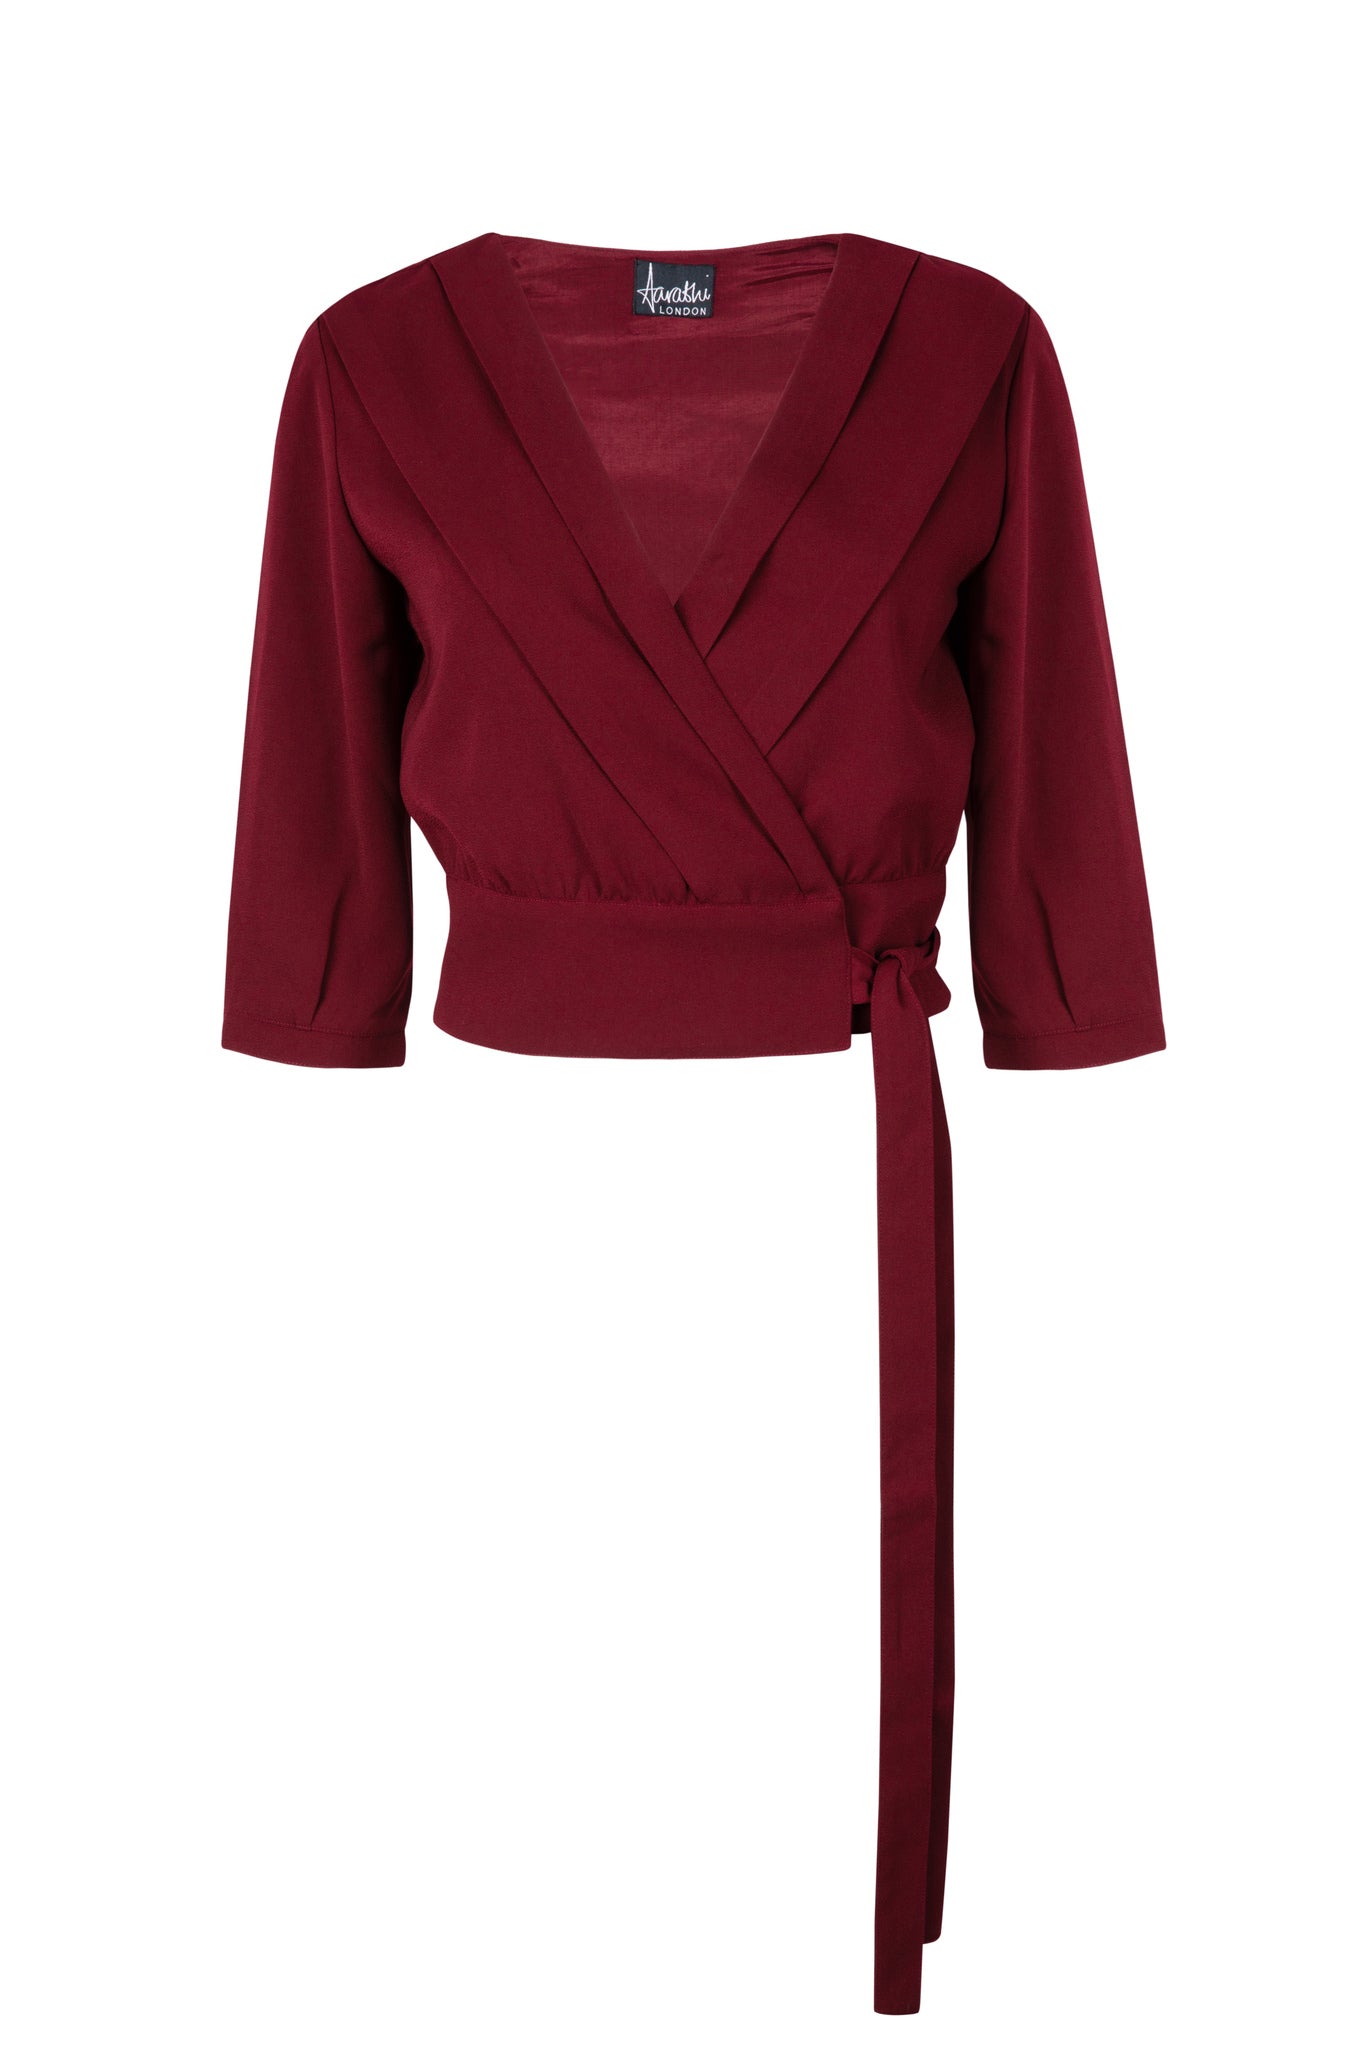 Pleated maroon shirt with tied waist and sleeves